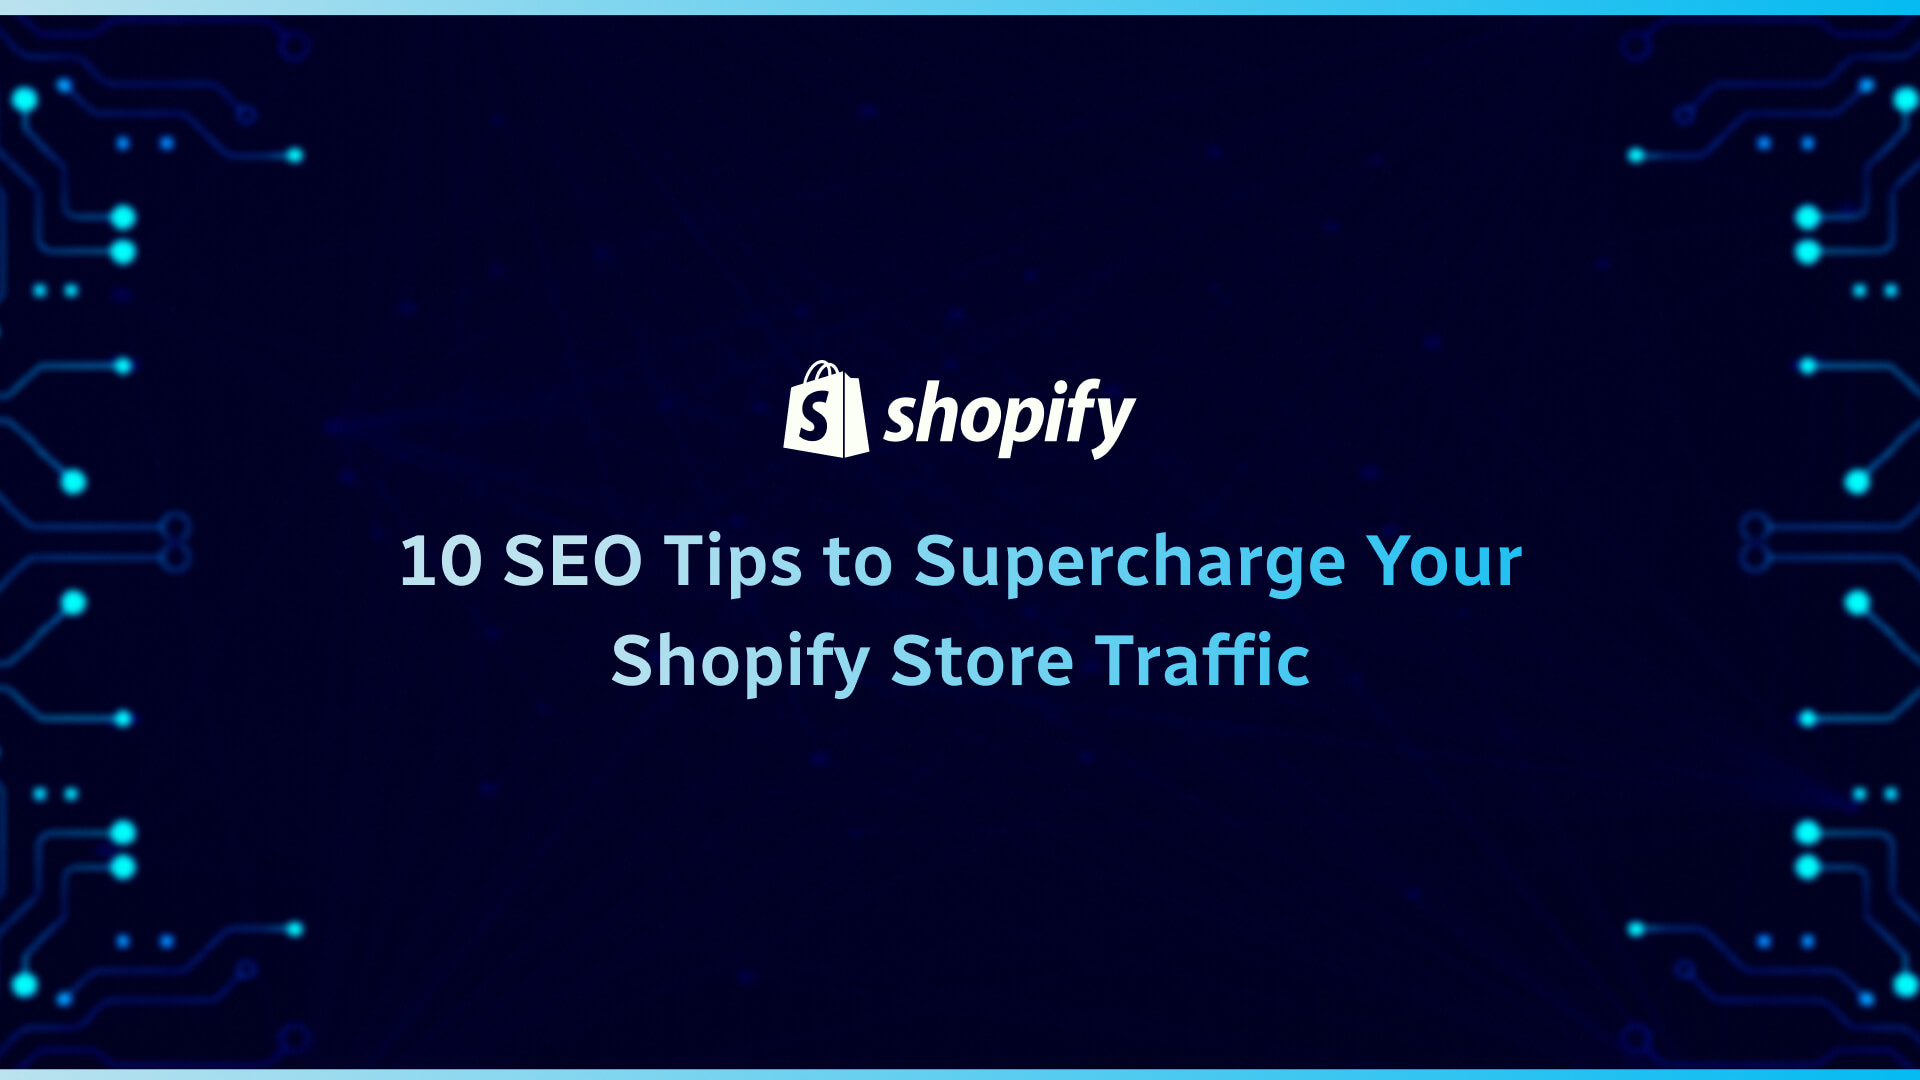 10 SEO Tips to Supercharge Your Shopify Store Traffic